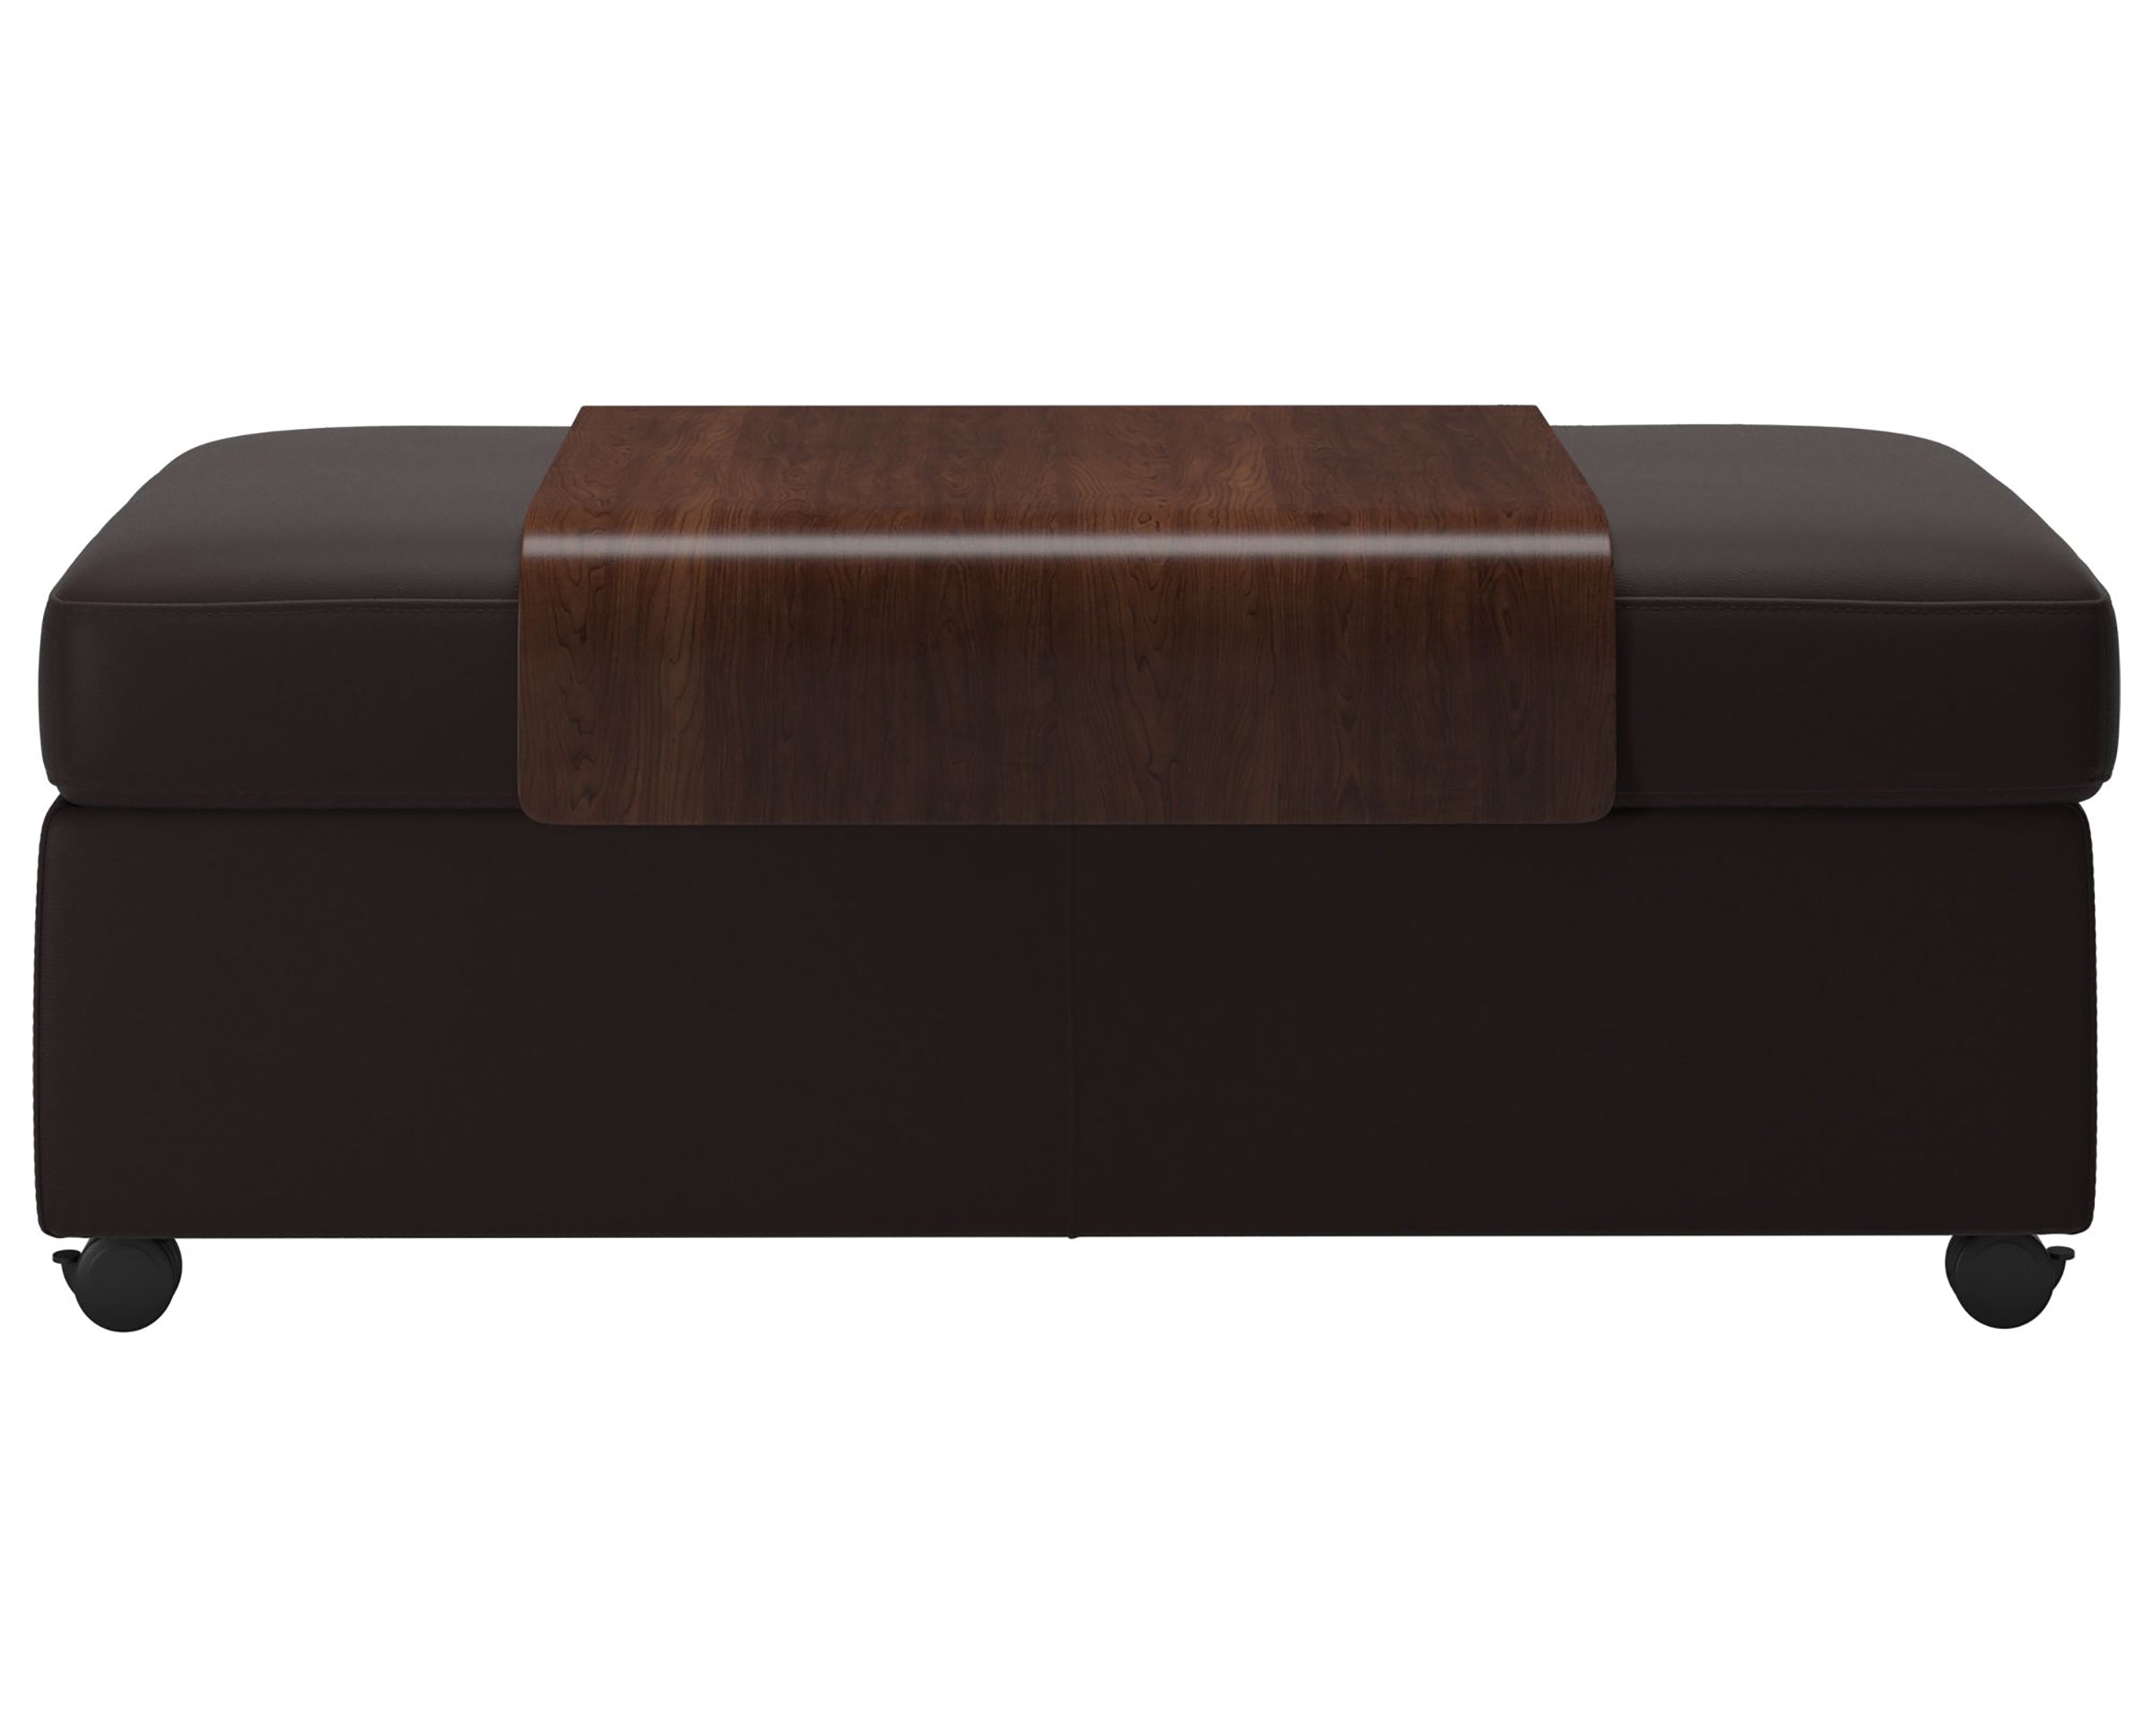 Paloma Leather Chocolate and Brown Finish | Stressless Double Ottoman with Table | Valley Ridge Furniture